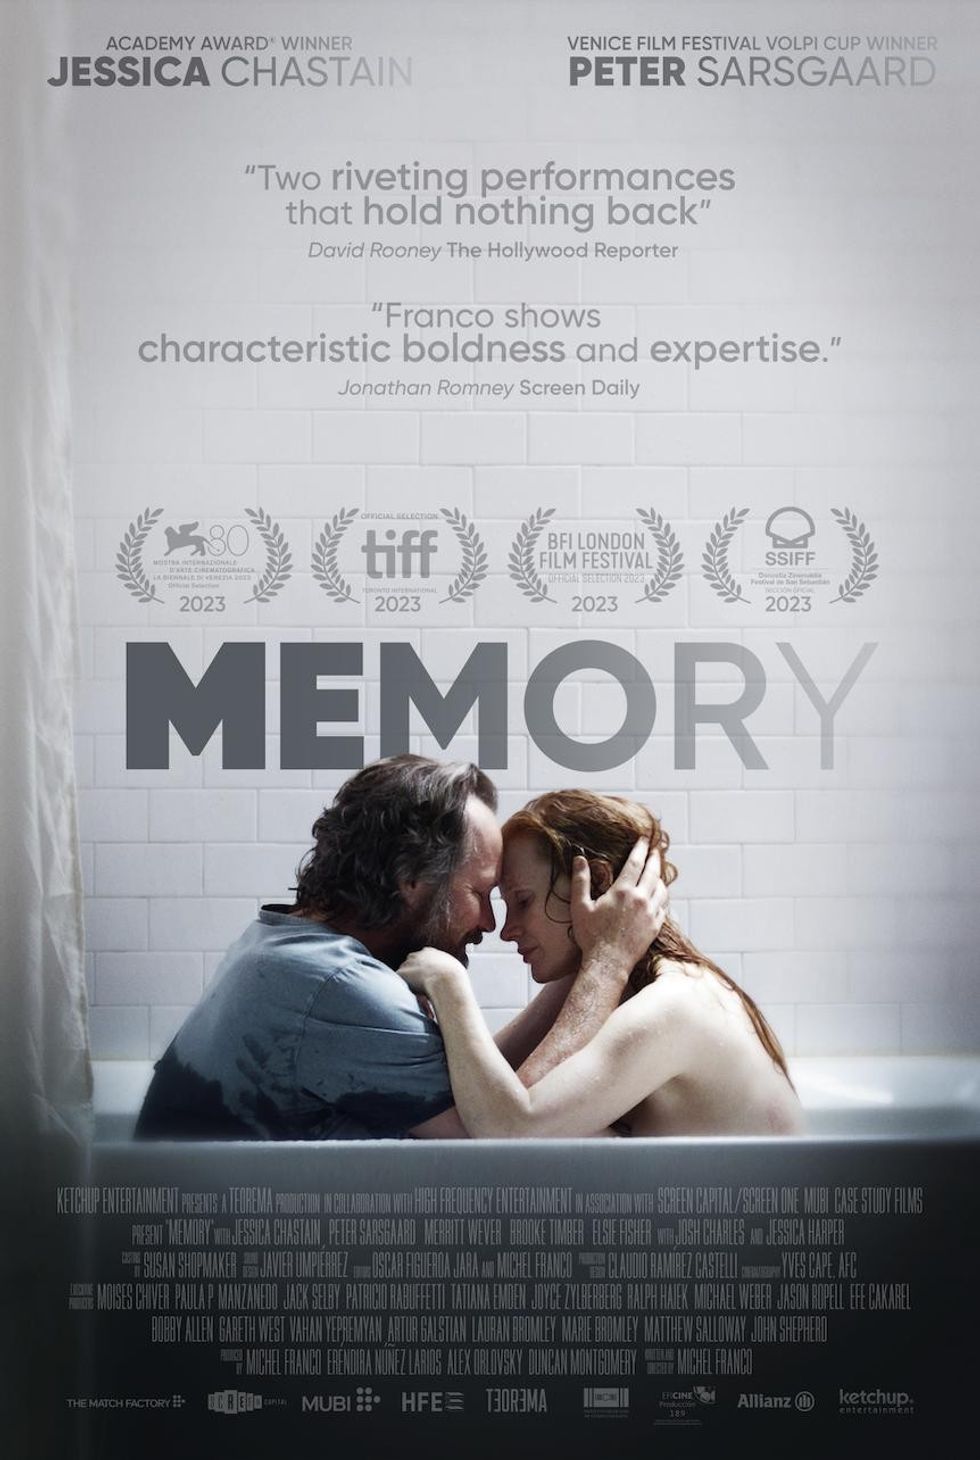 Memory Jessica Chastain and Peter Sarsgaard